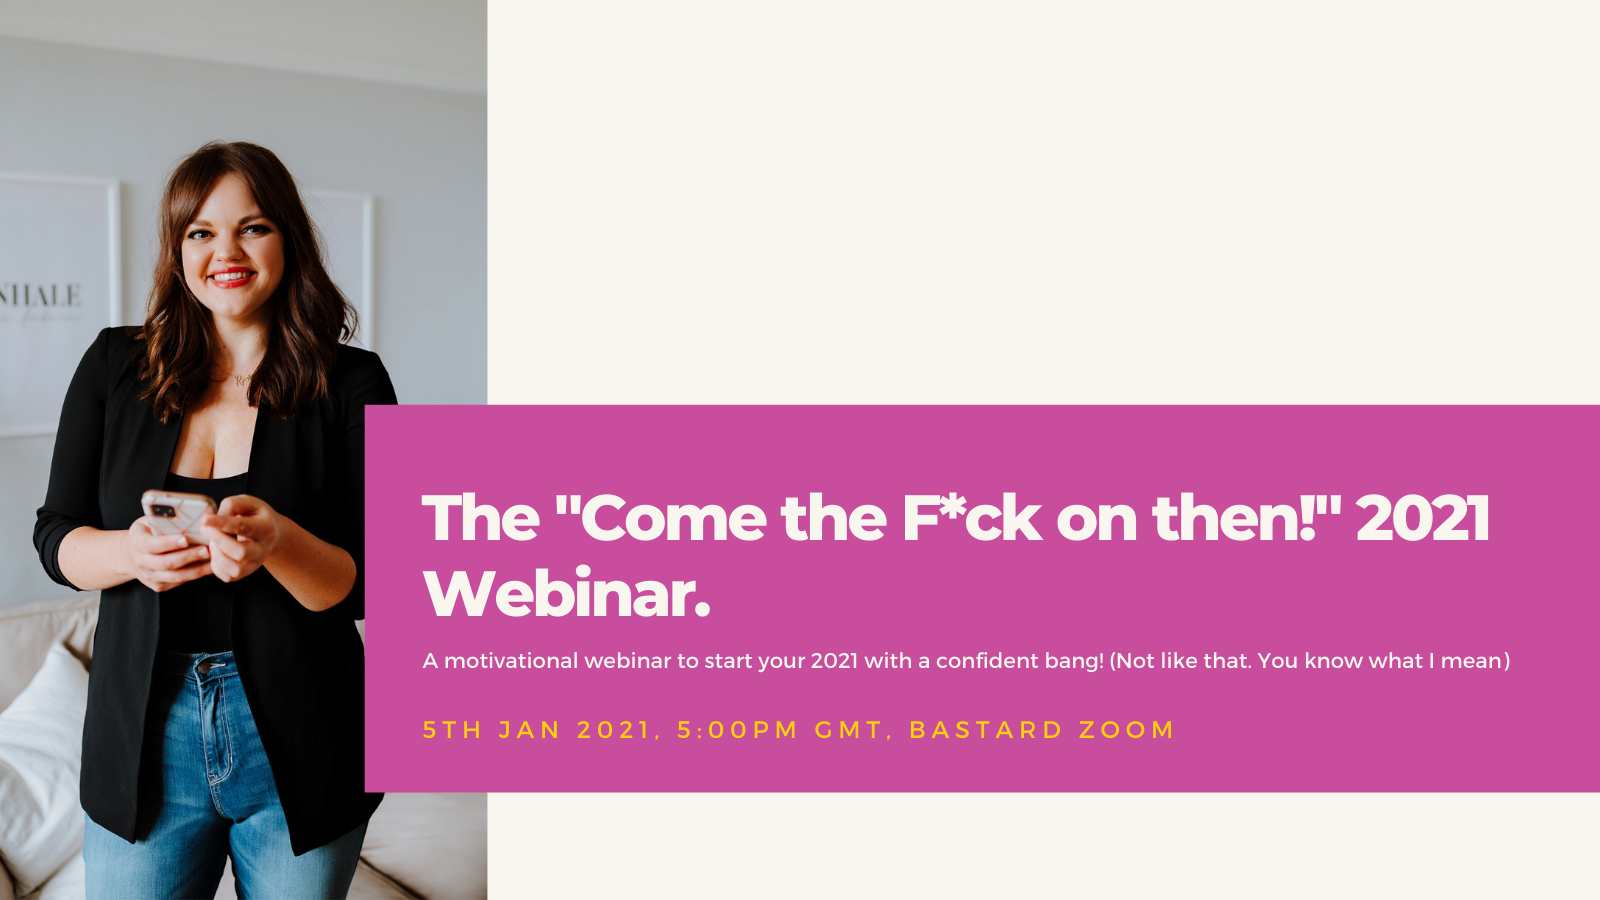 The “Come the F*ck on then!” 2021 Webinar.